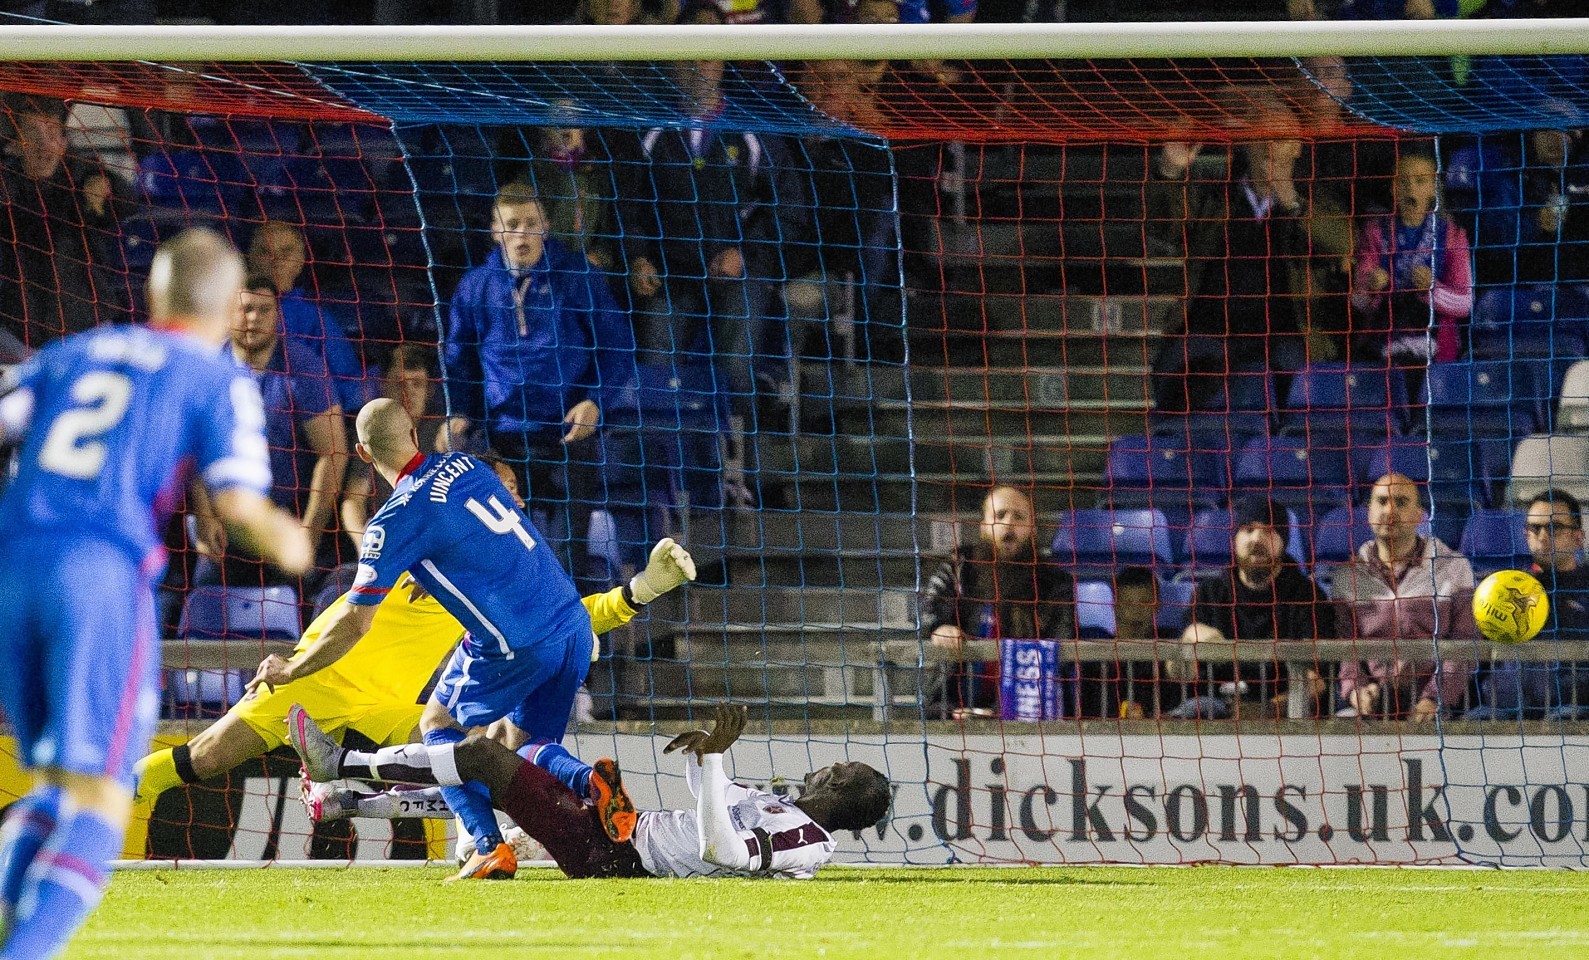 James Vincent breaks the deadlock for Caley Thistle against Hearts.